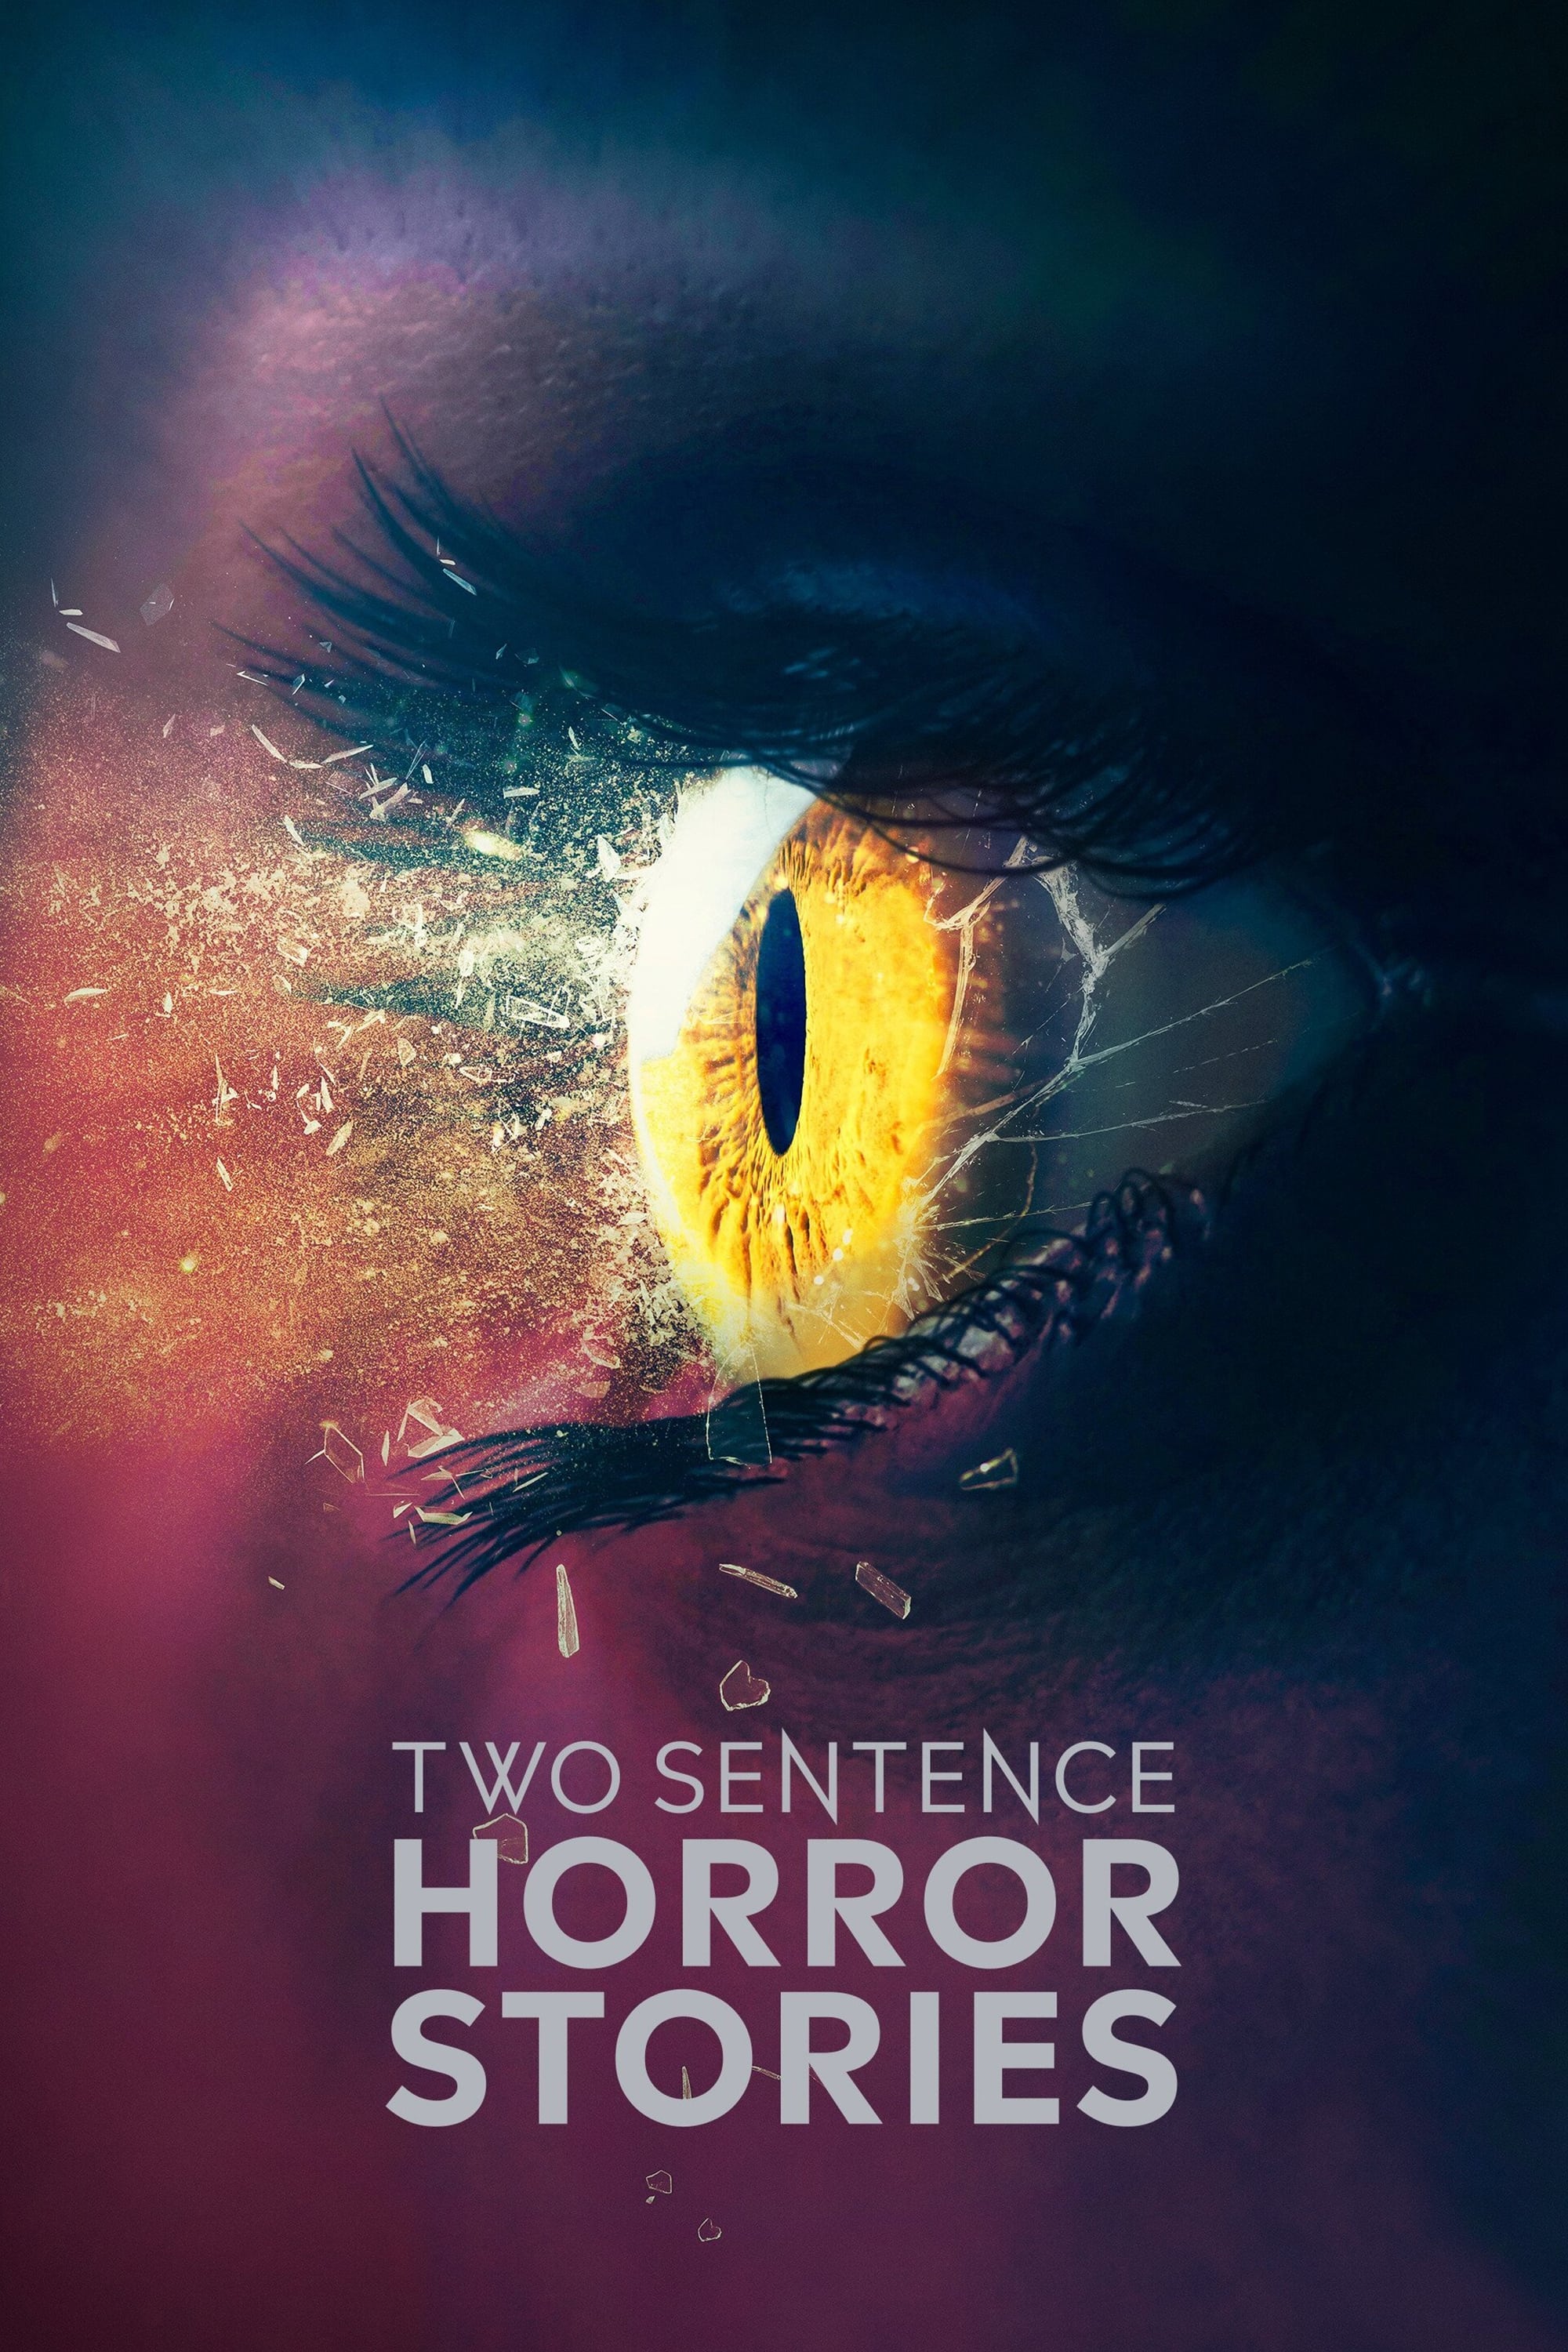 Two Sentence Horror Stories TV Shows About Psychological Horror